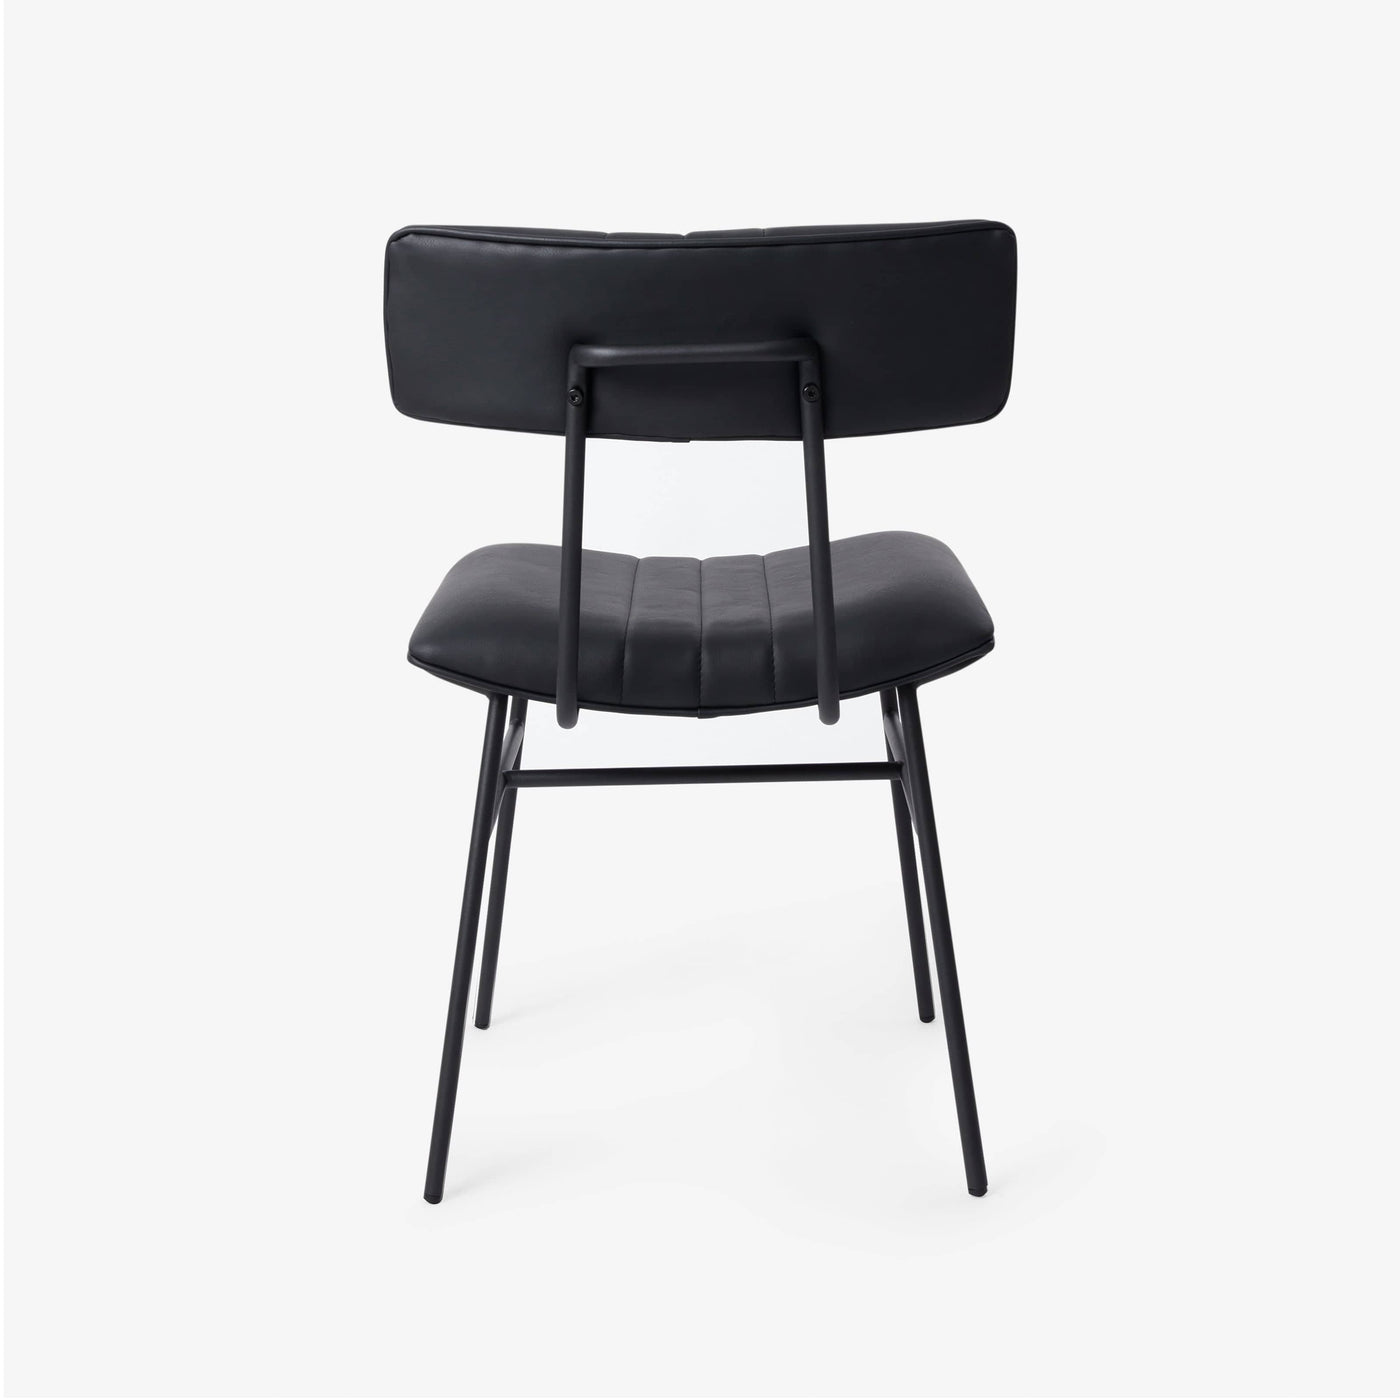 Maxim Dining Chair, Black Dining Chairs & Benches sazy.com